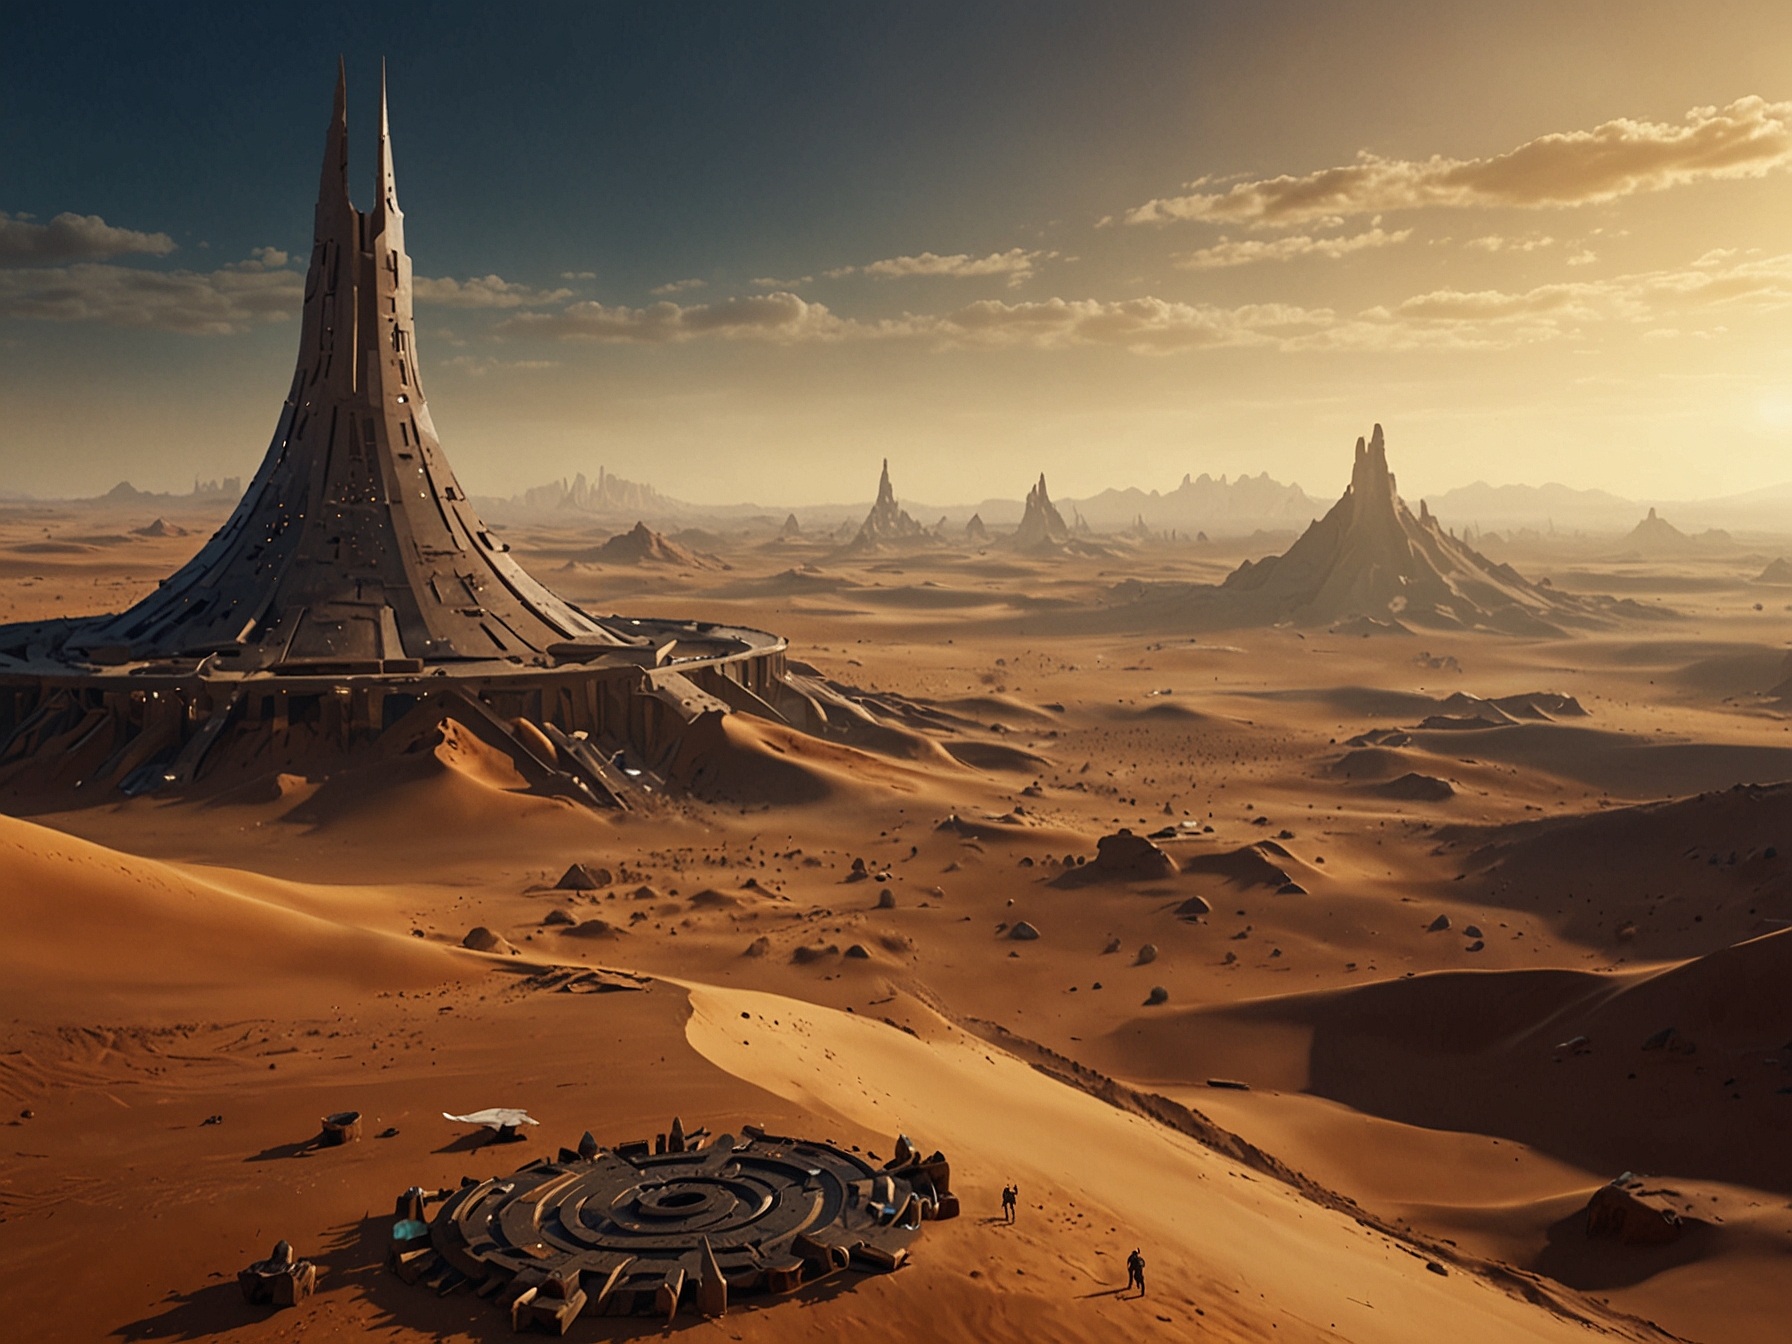 A breathtaking view of reimagined Arrakis, featuring vast deserts, bustling seitch communities, and monumental cities. Advanced AI and adaptive environments amplify the immersive experience.